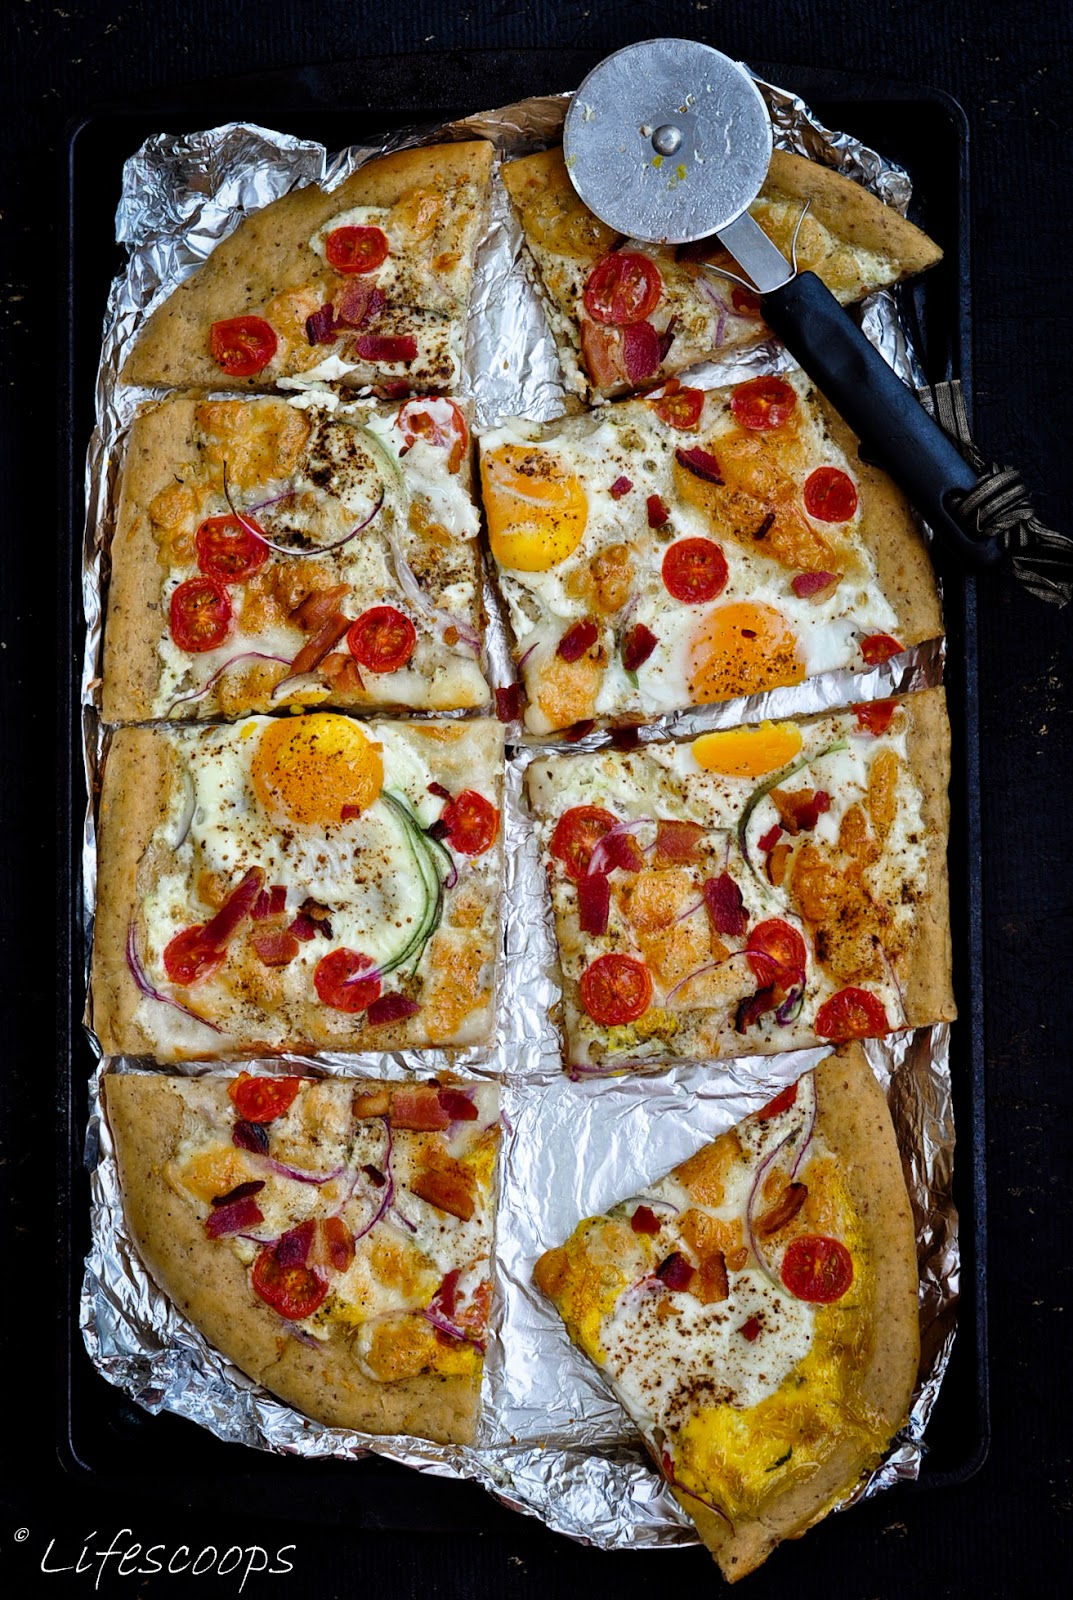 Life Scoops: Breakfast Pizza with Eggs and Bacon